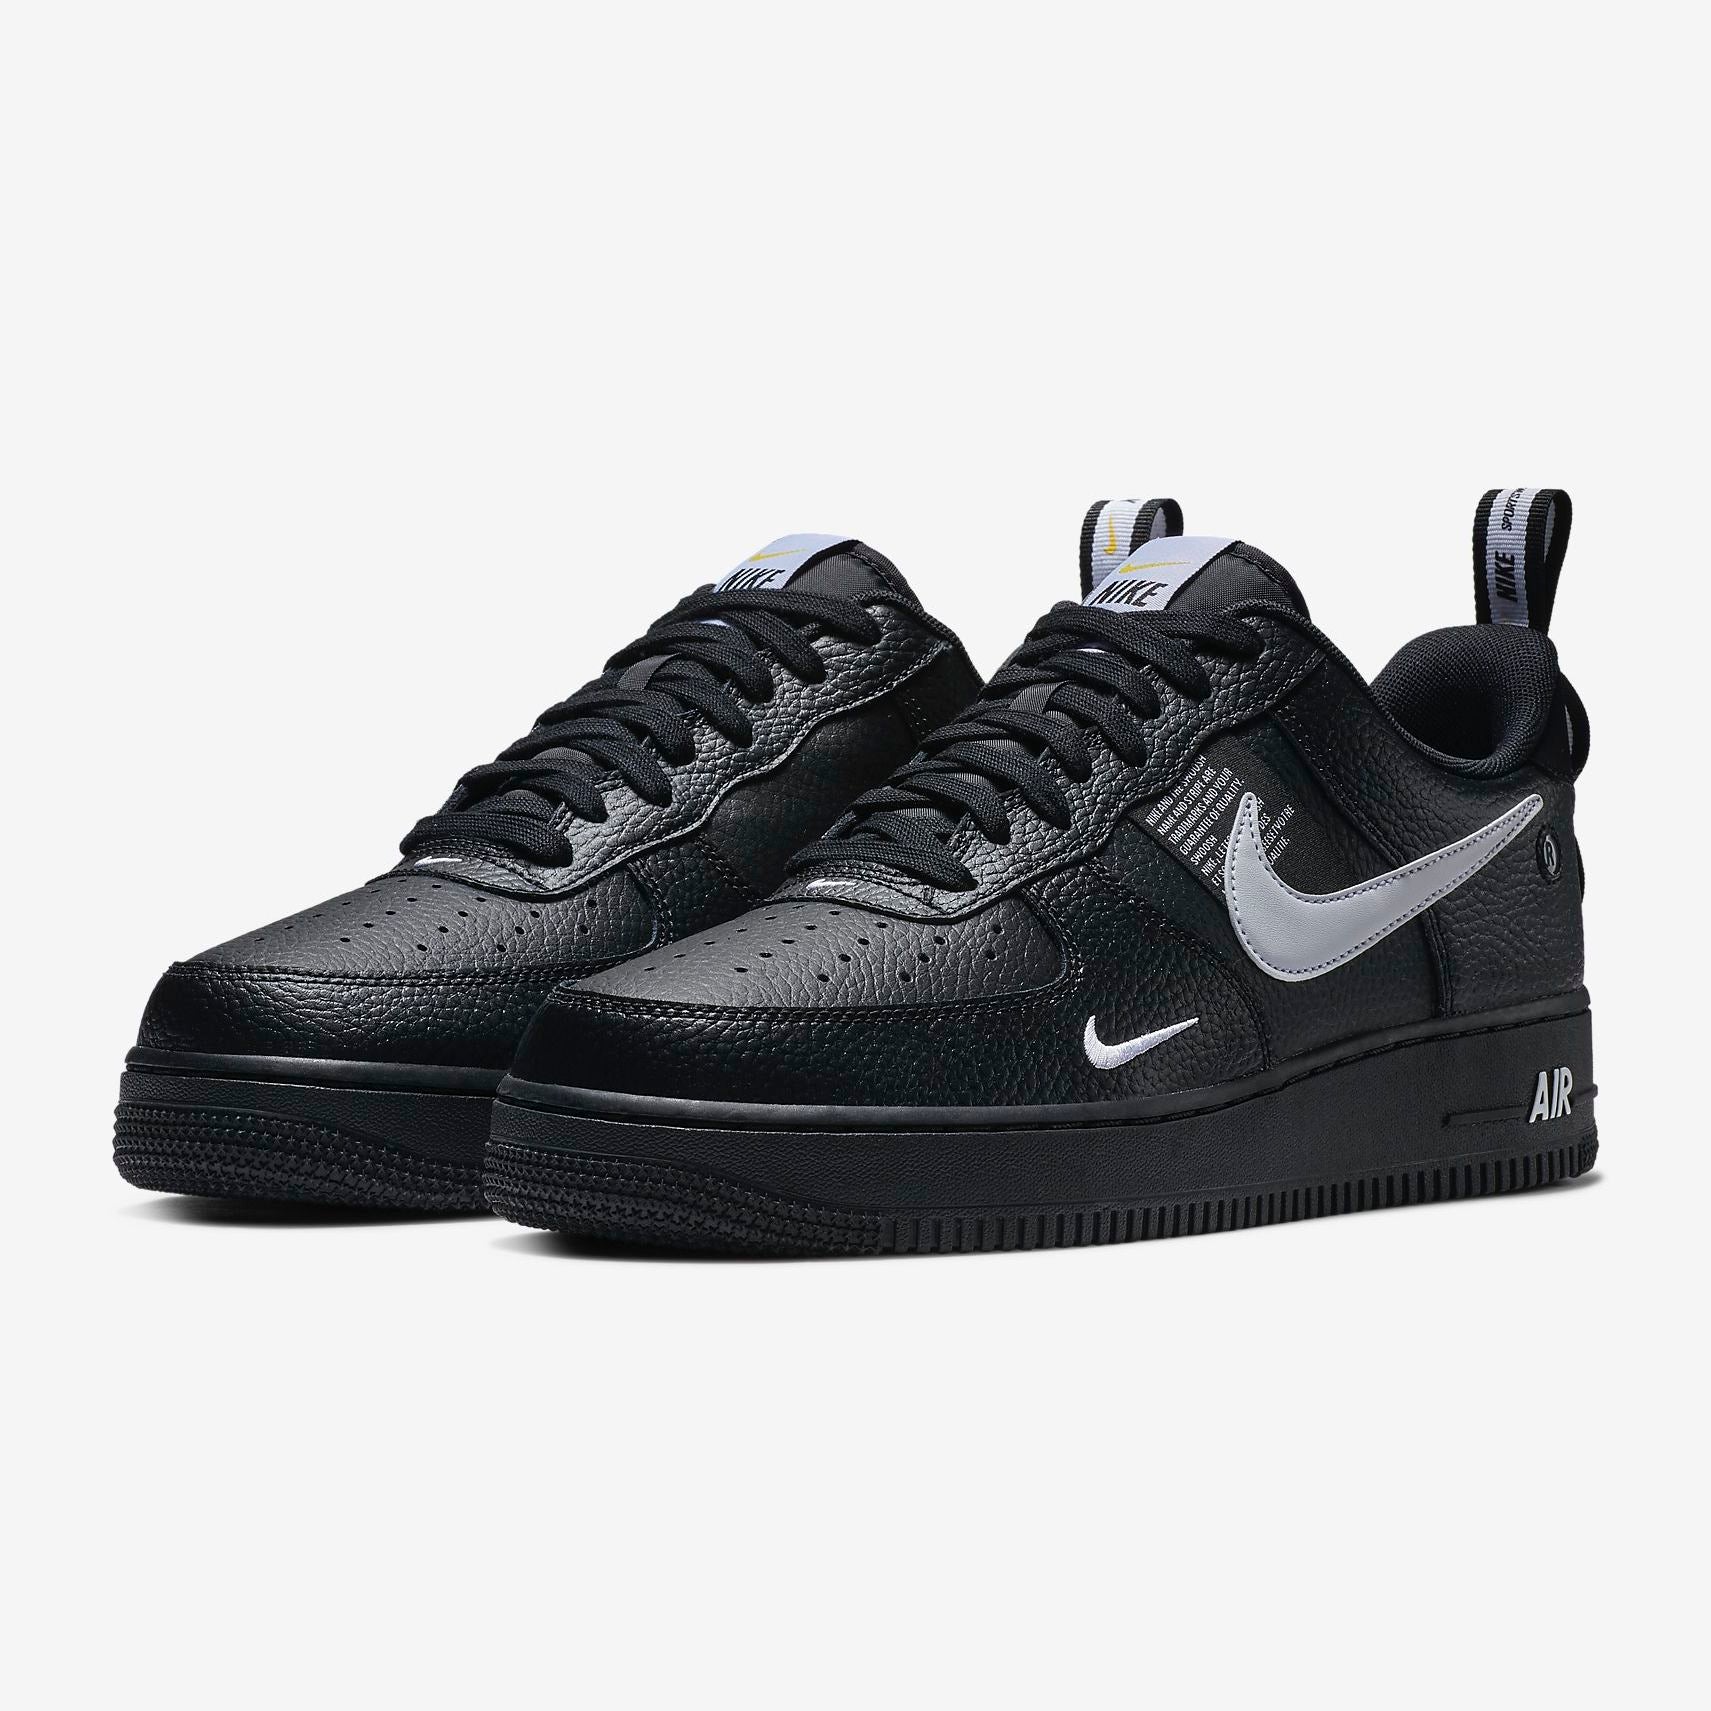 Nike Air Force 1 Low LV8 Utility Black & White: Release Date, Price &  More Info